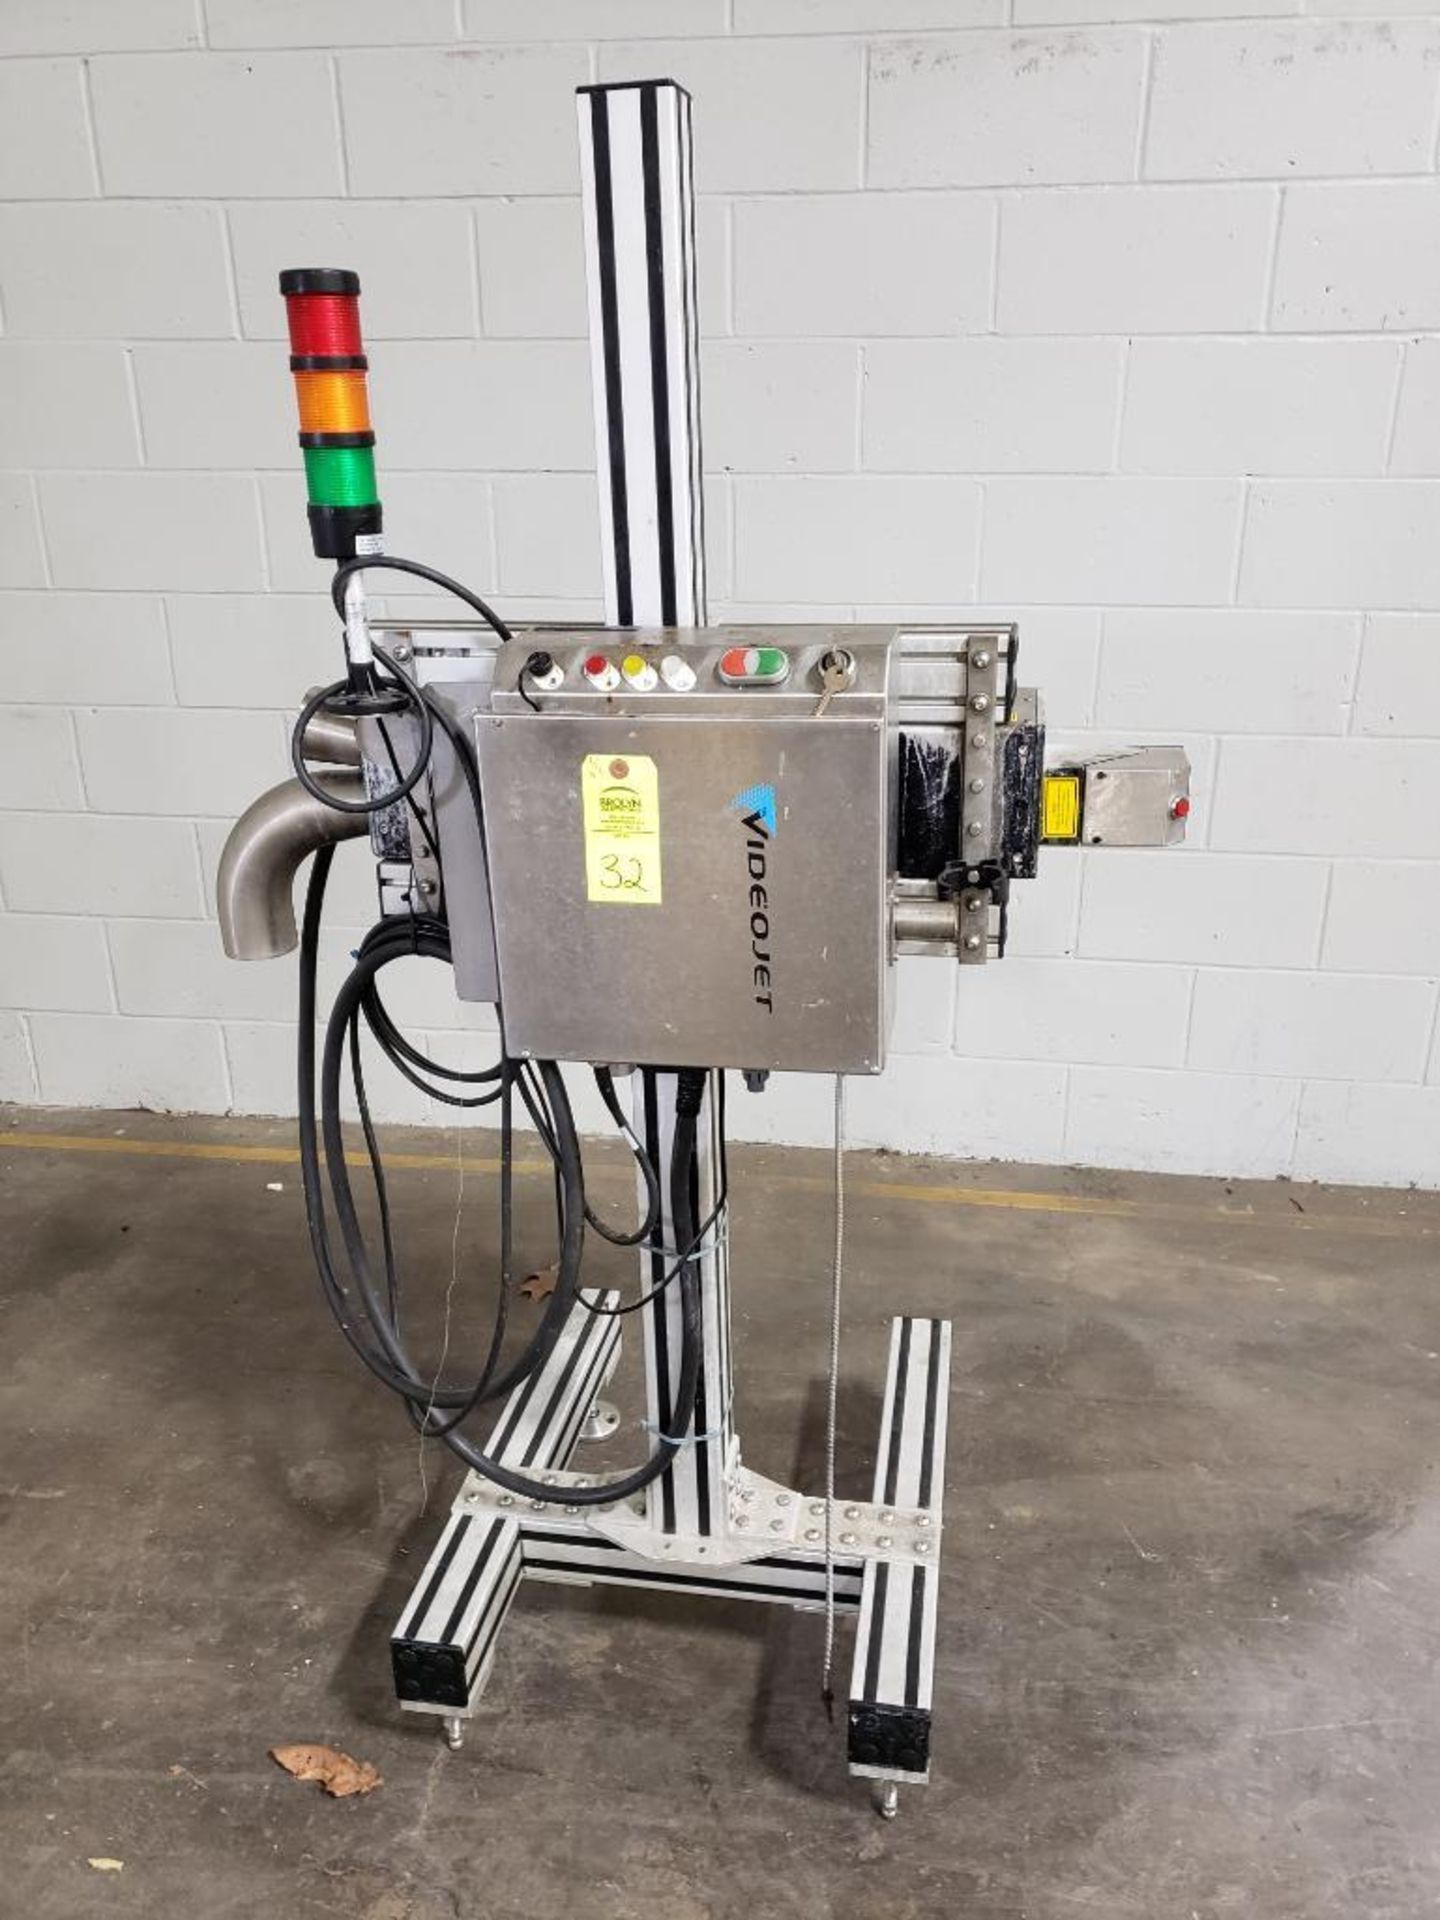 Videojet laser marking system. Unit does include dust collector and blower not pictured.